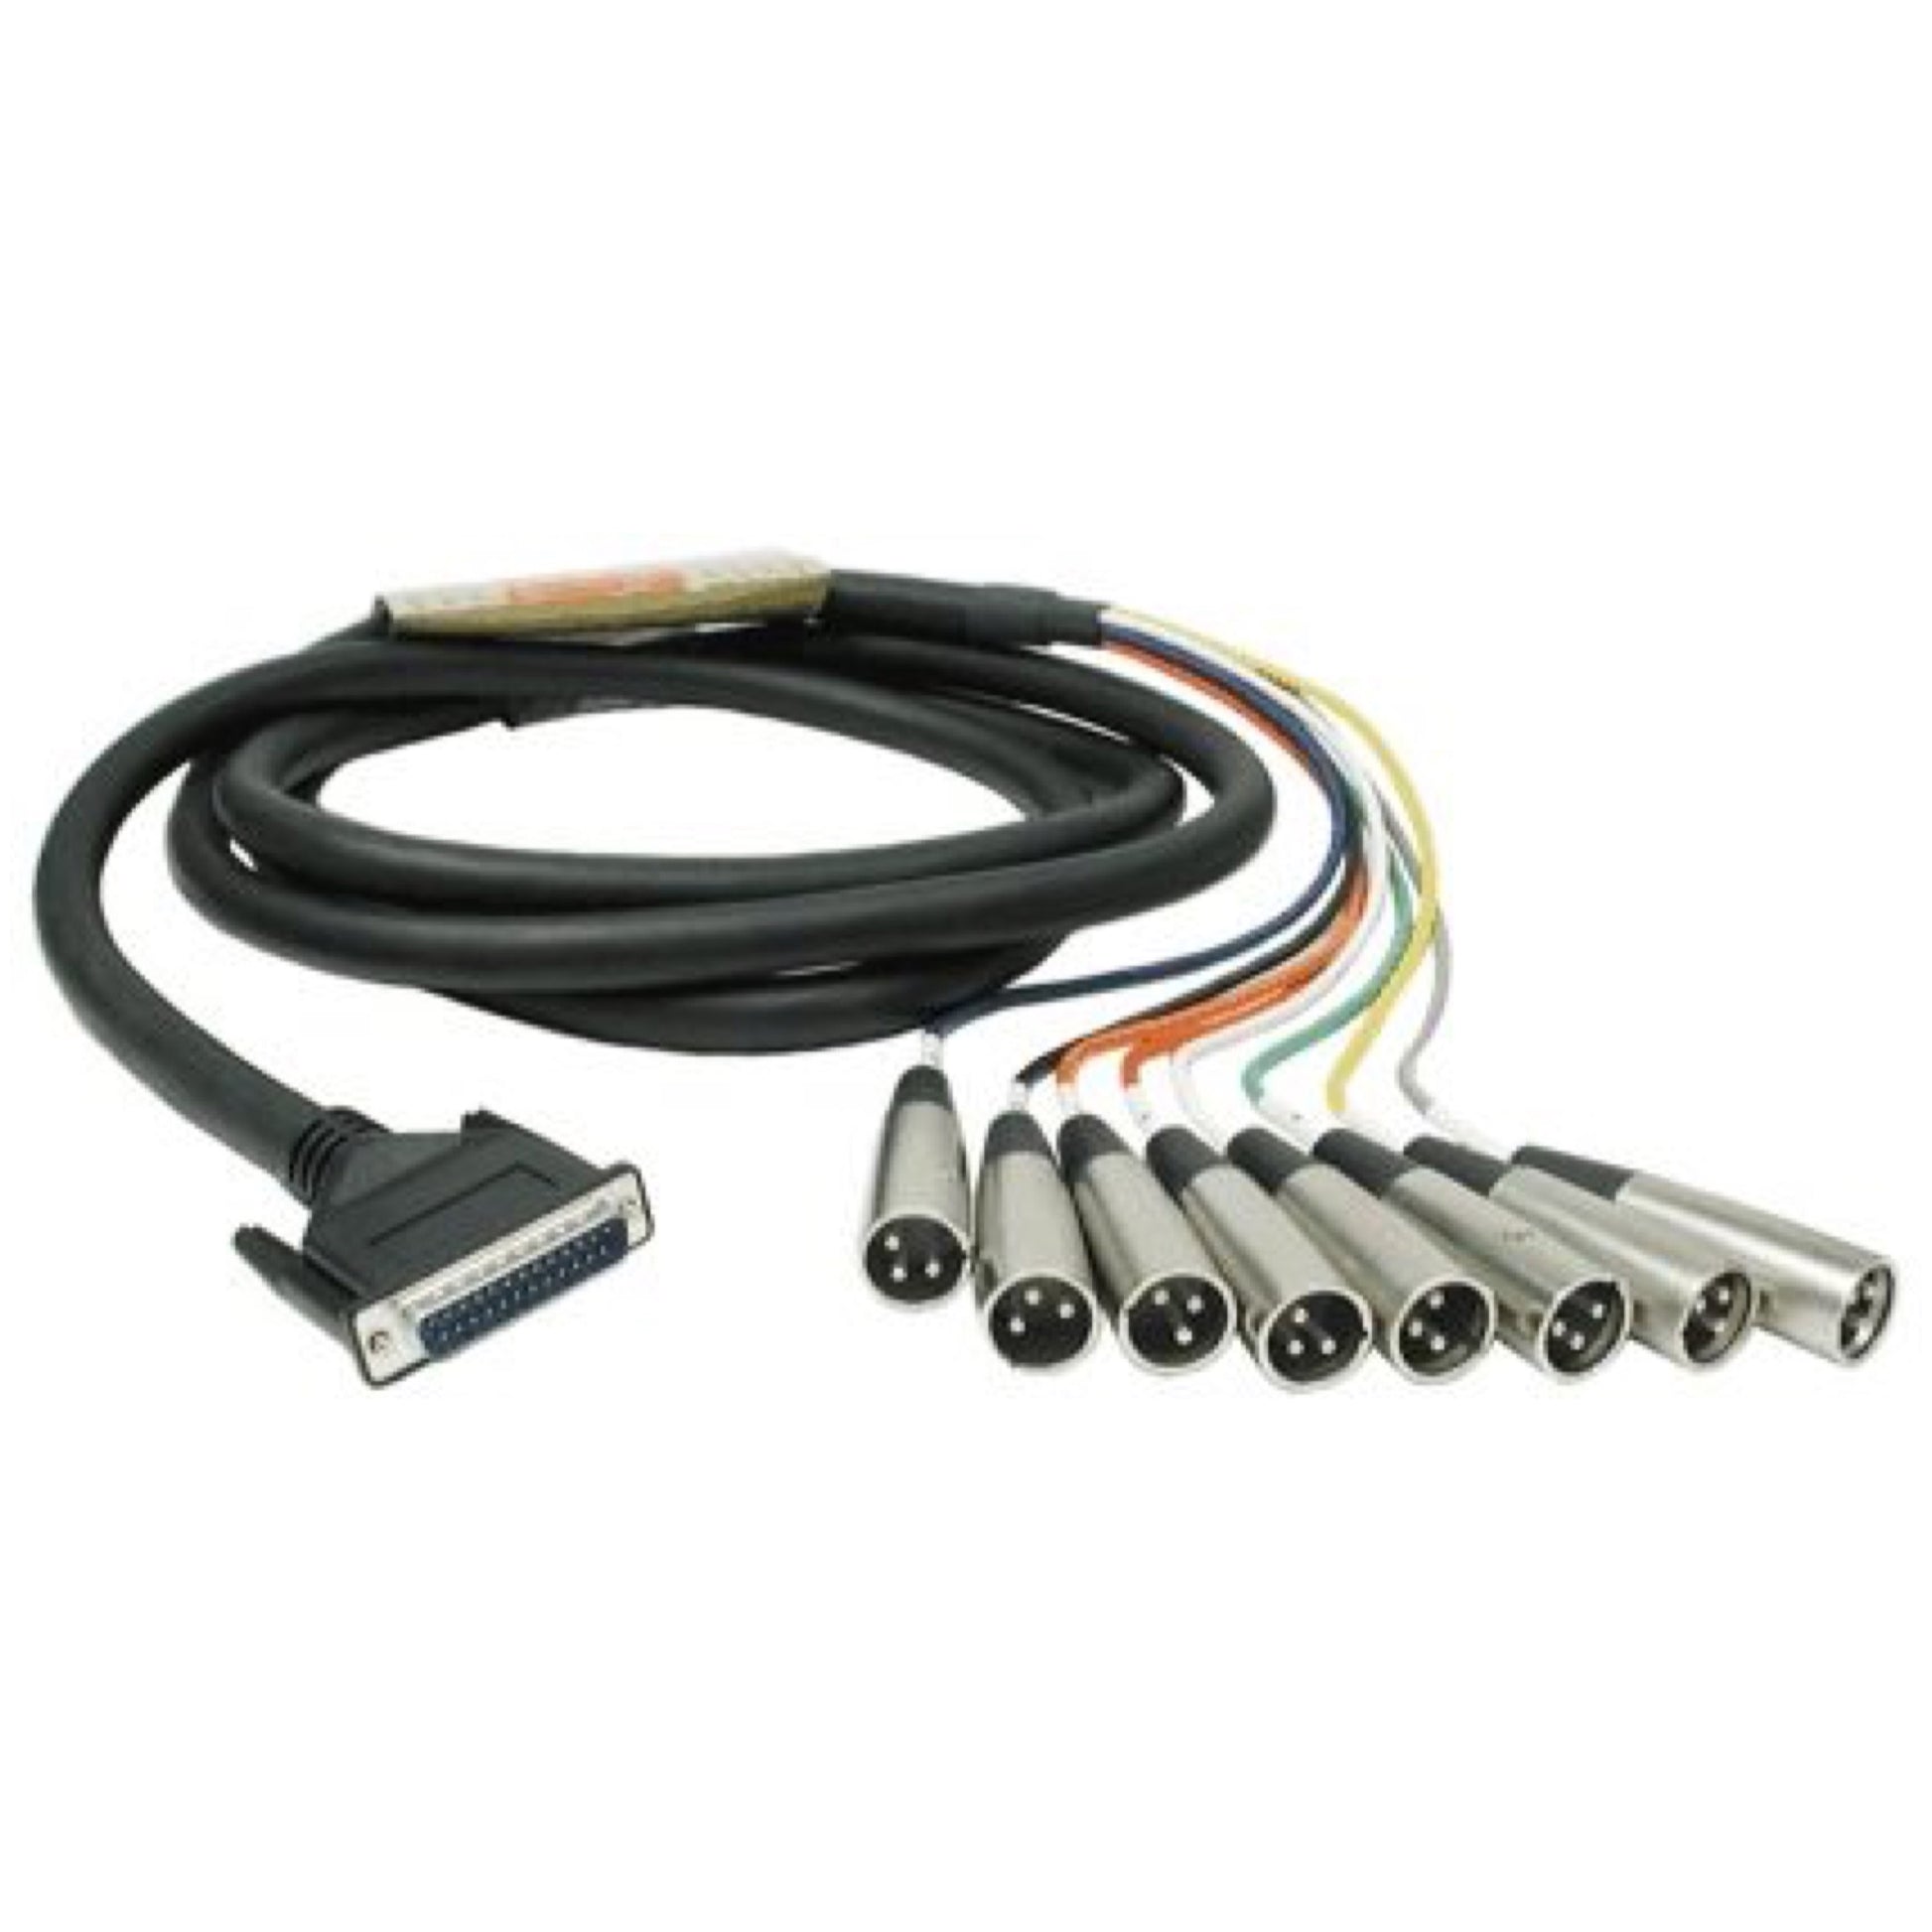 Hosa DTM800 Snake Cable (25-Pin D-Sub to XLR Male x 8), 16.5 Foot, 5 Meters